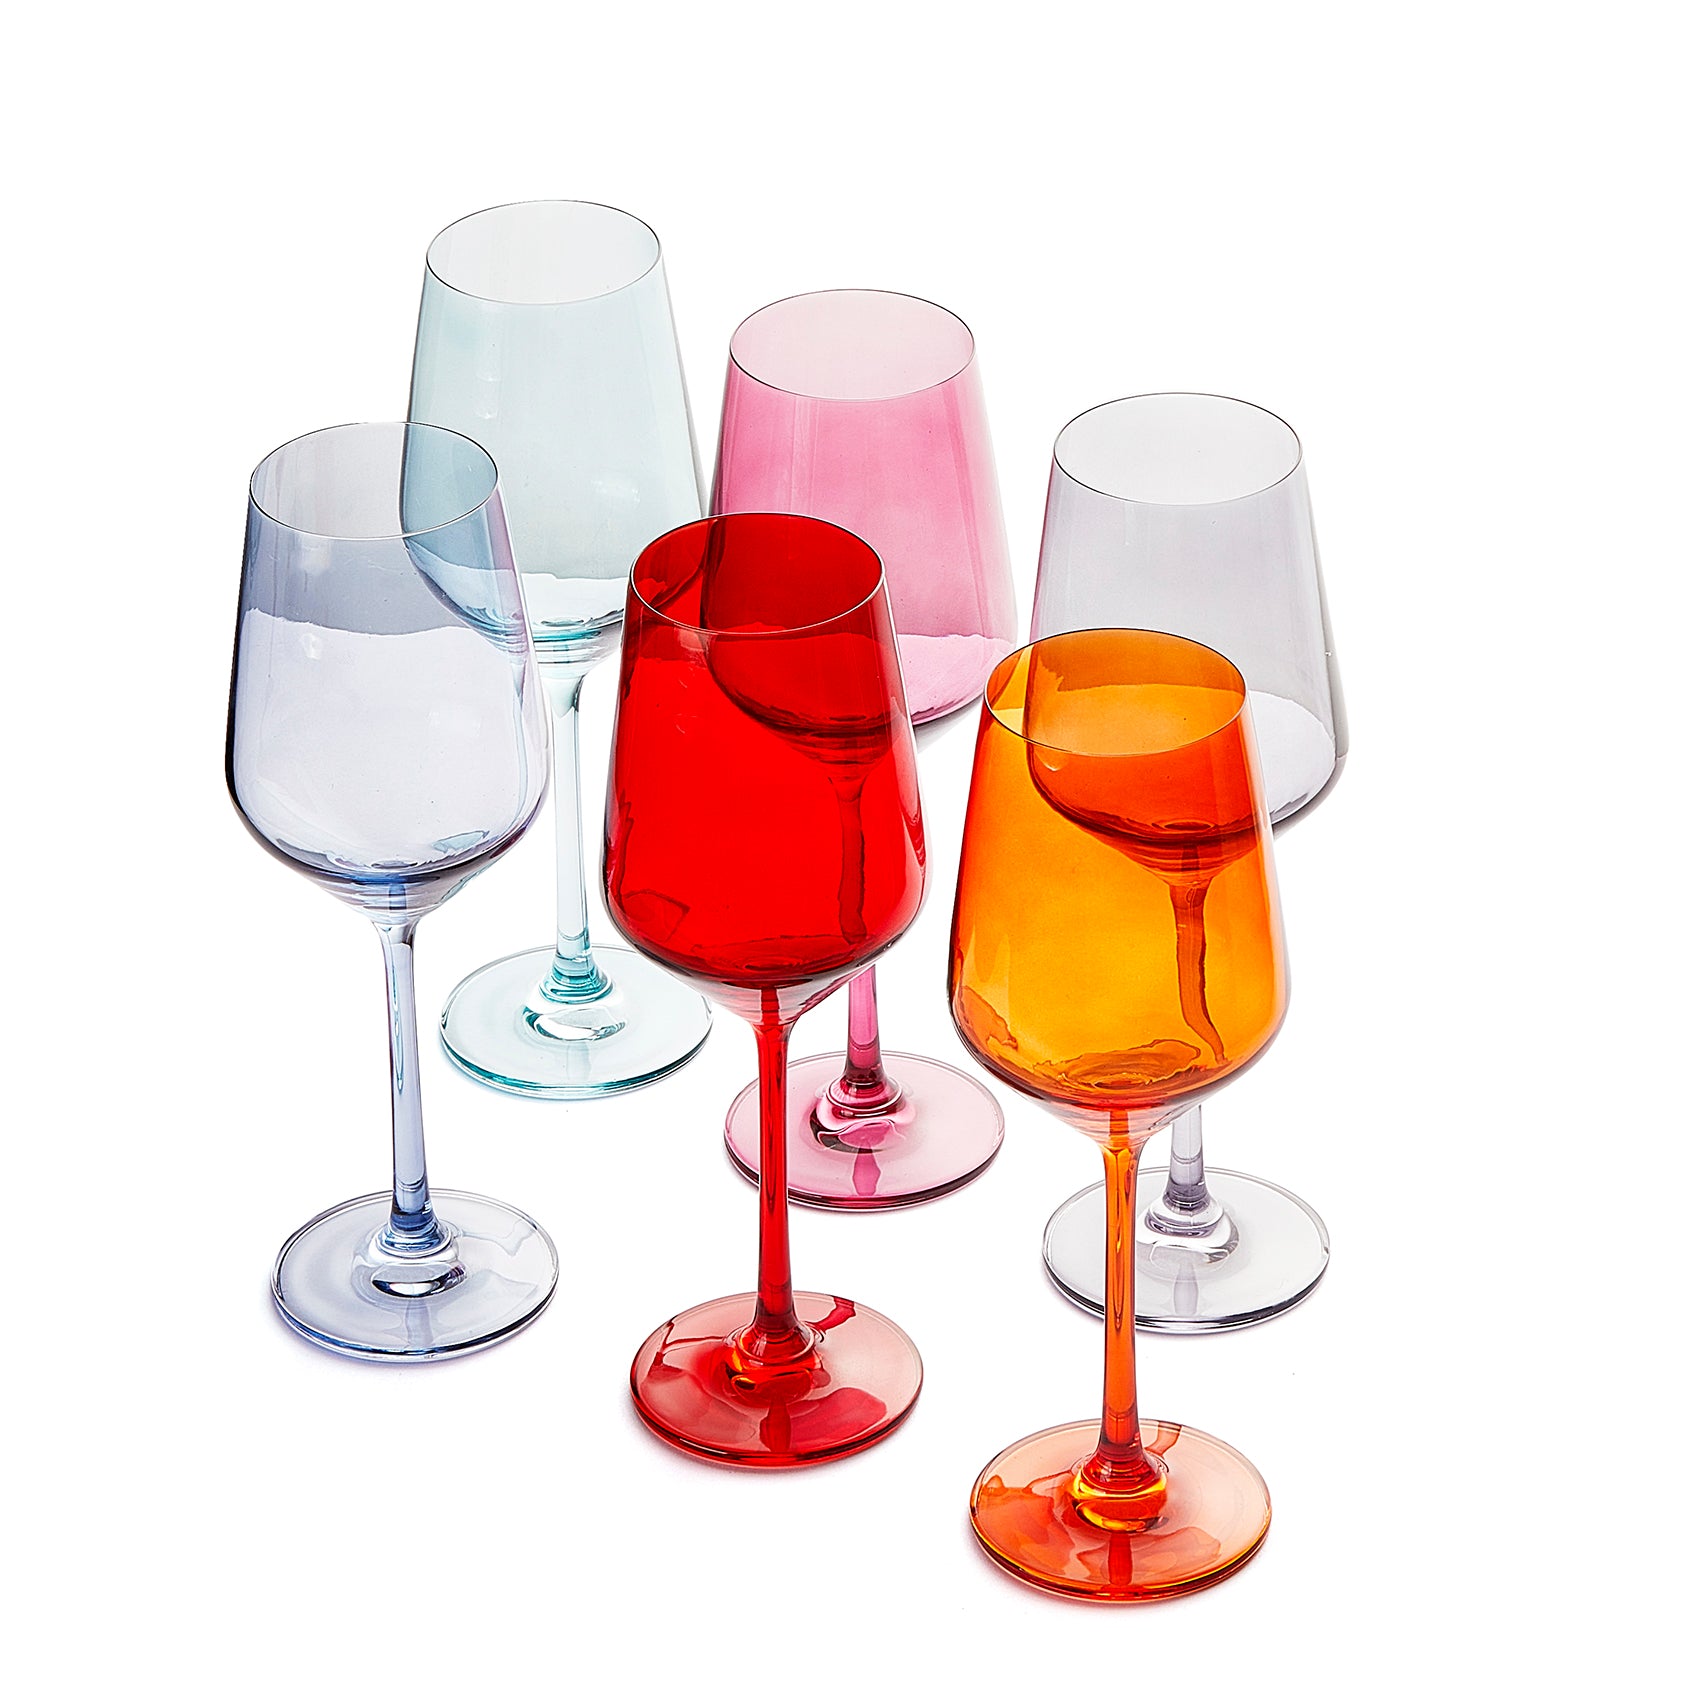 Make Your Own Set Wine Glass SINGLE, Colorful Green Colored Large 12 oz  Glass, Unique Italian Style …See more Make Your Own Set Wine Glass SINGLE